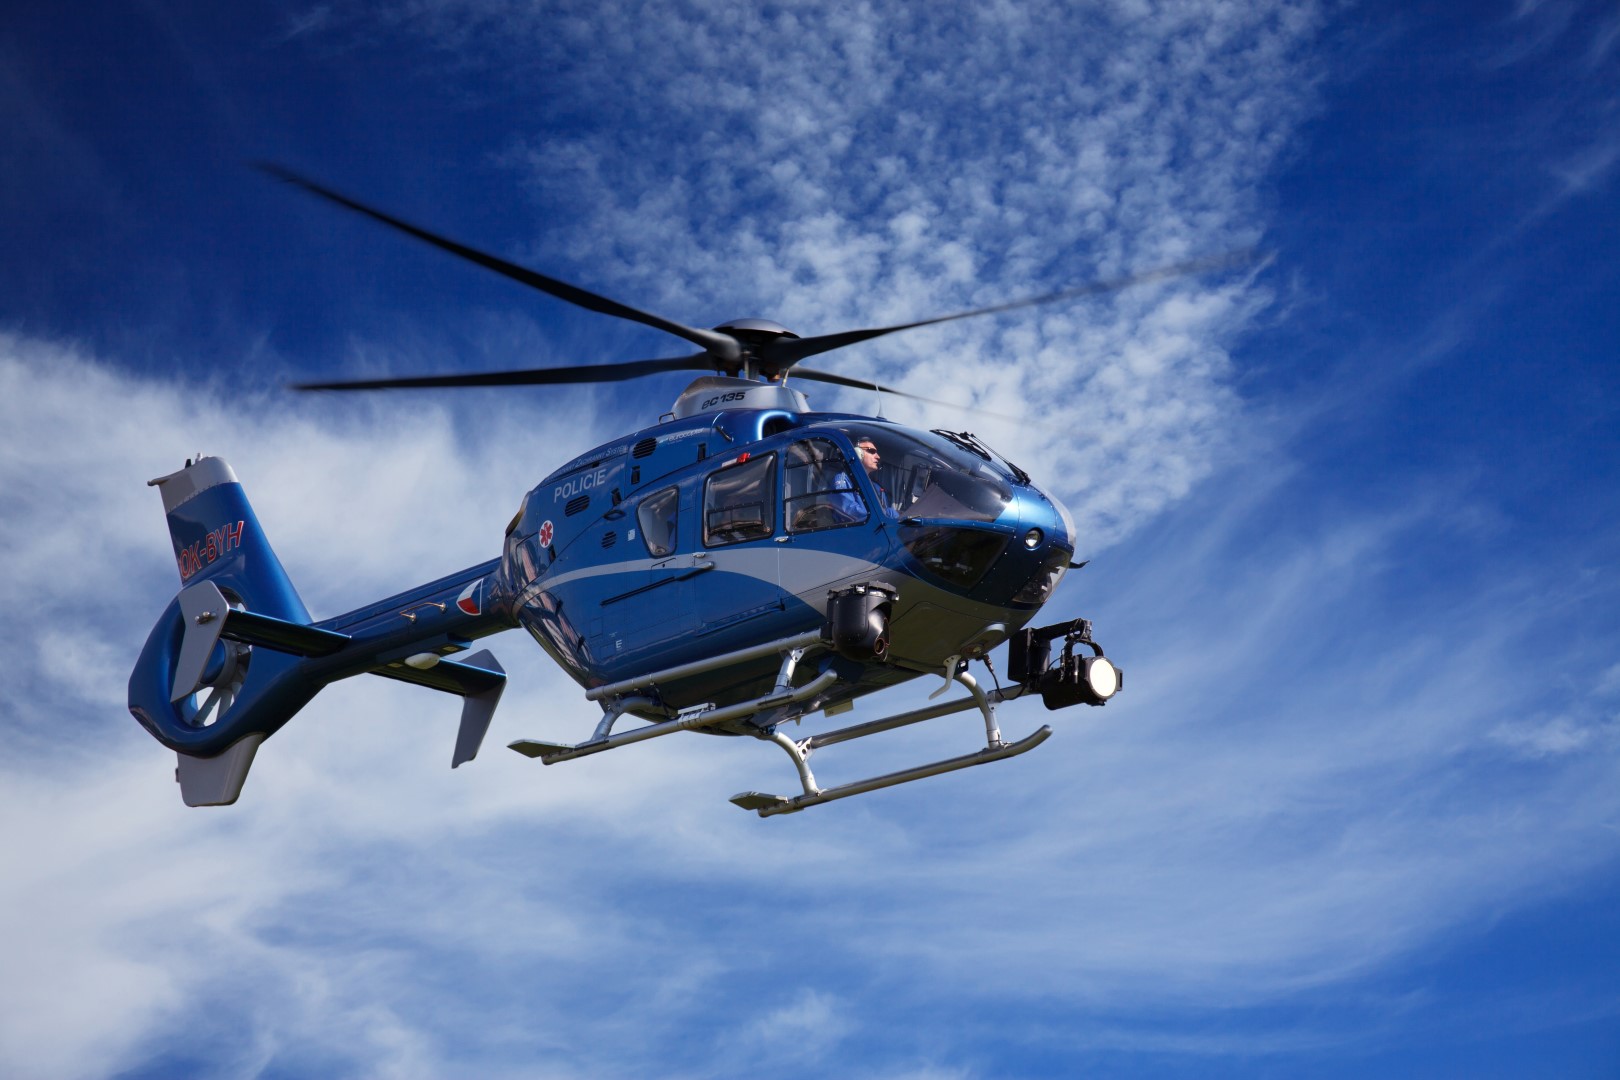 The thrill of a tourist helicopter flight